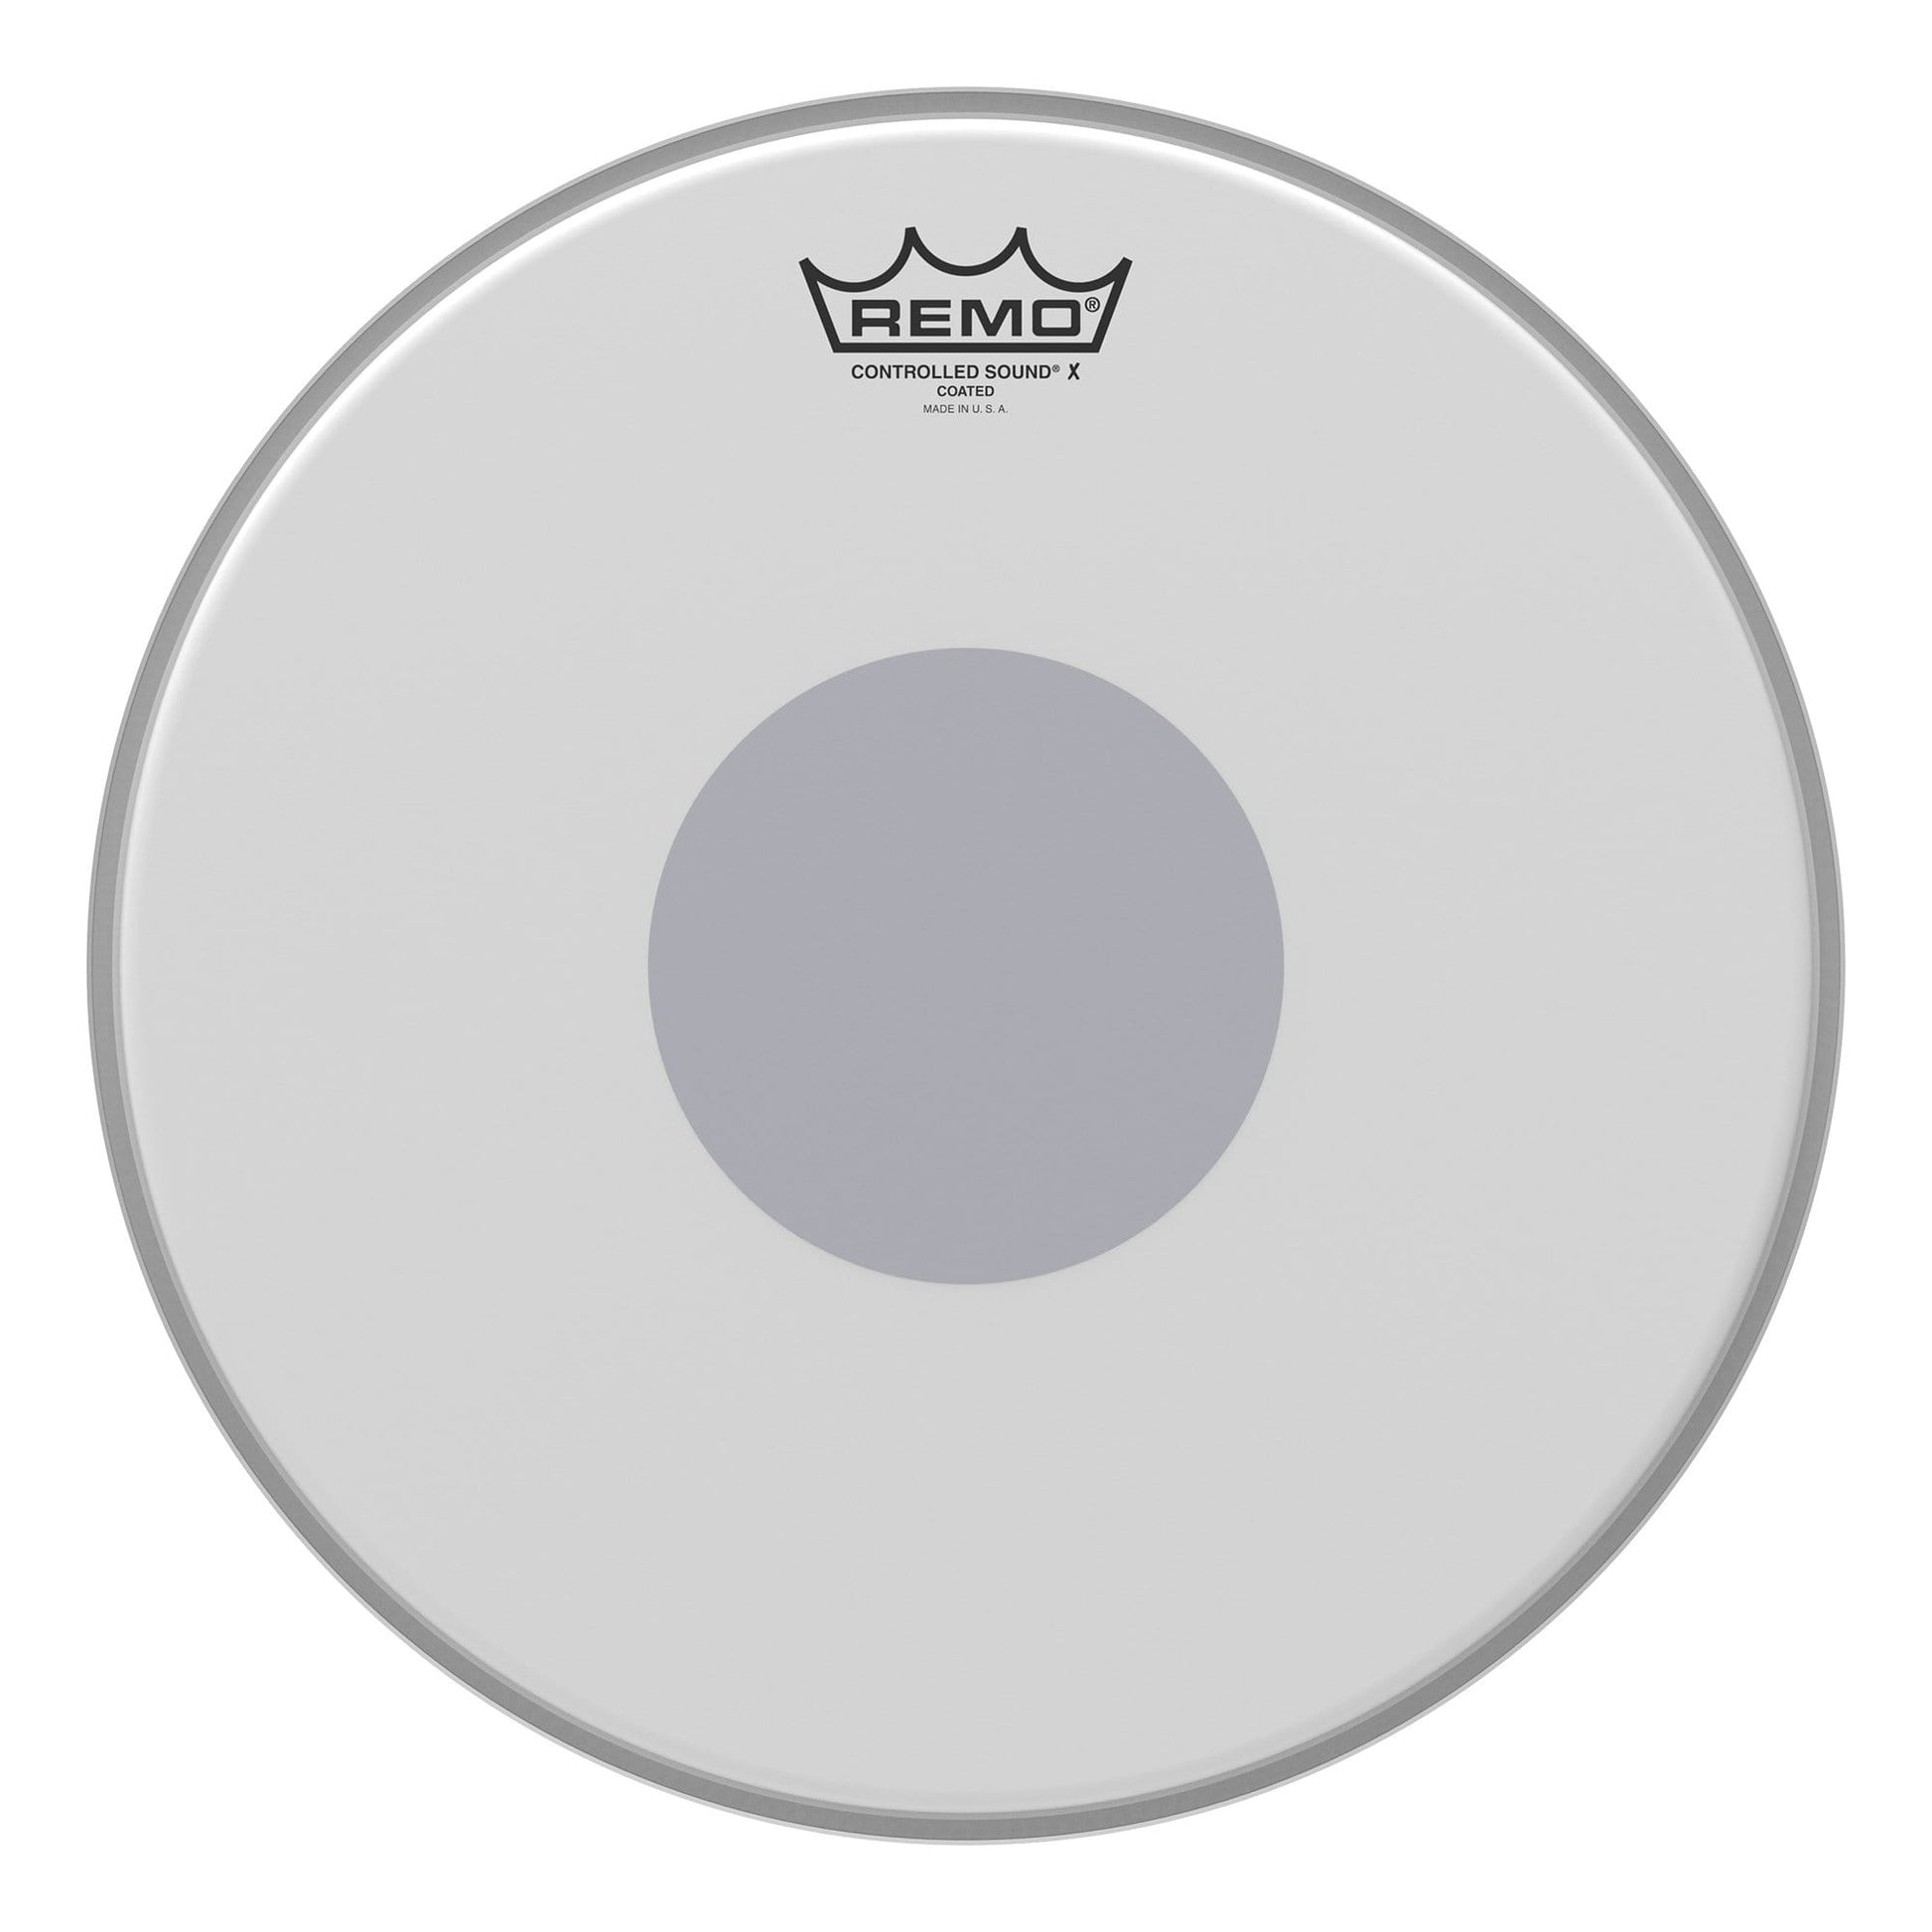 Remo 13" Controlled Sound X Coated Snare Drumhead w/Bottom Black Dot Drums and Percussion / Parts and Accessories / Heads